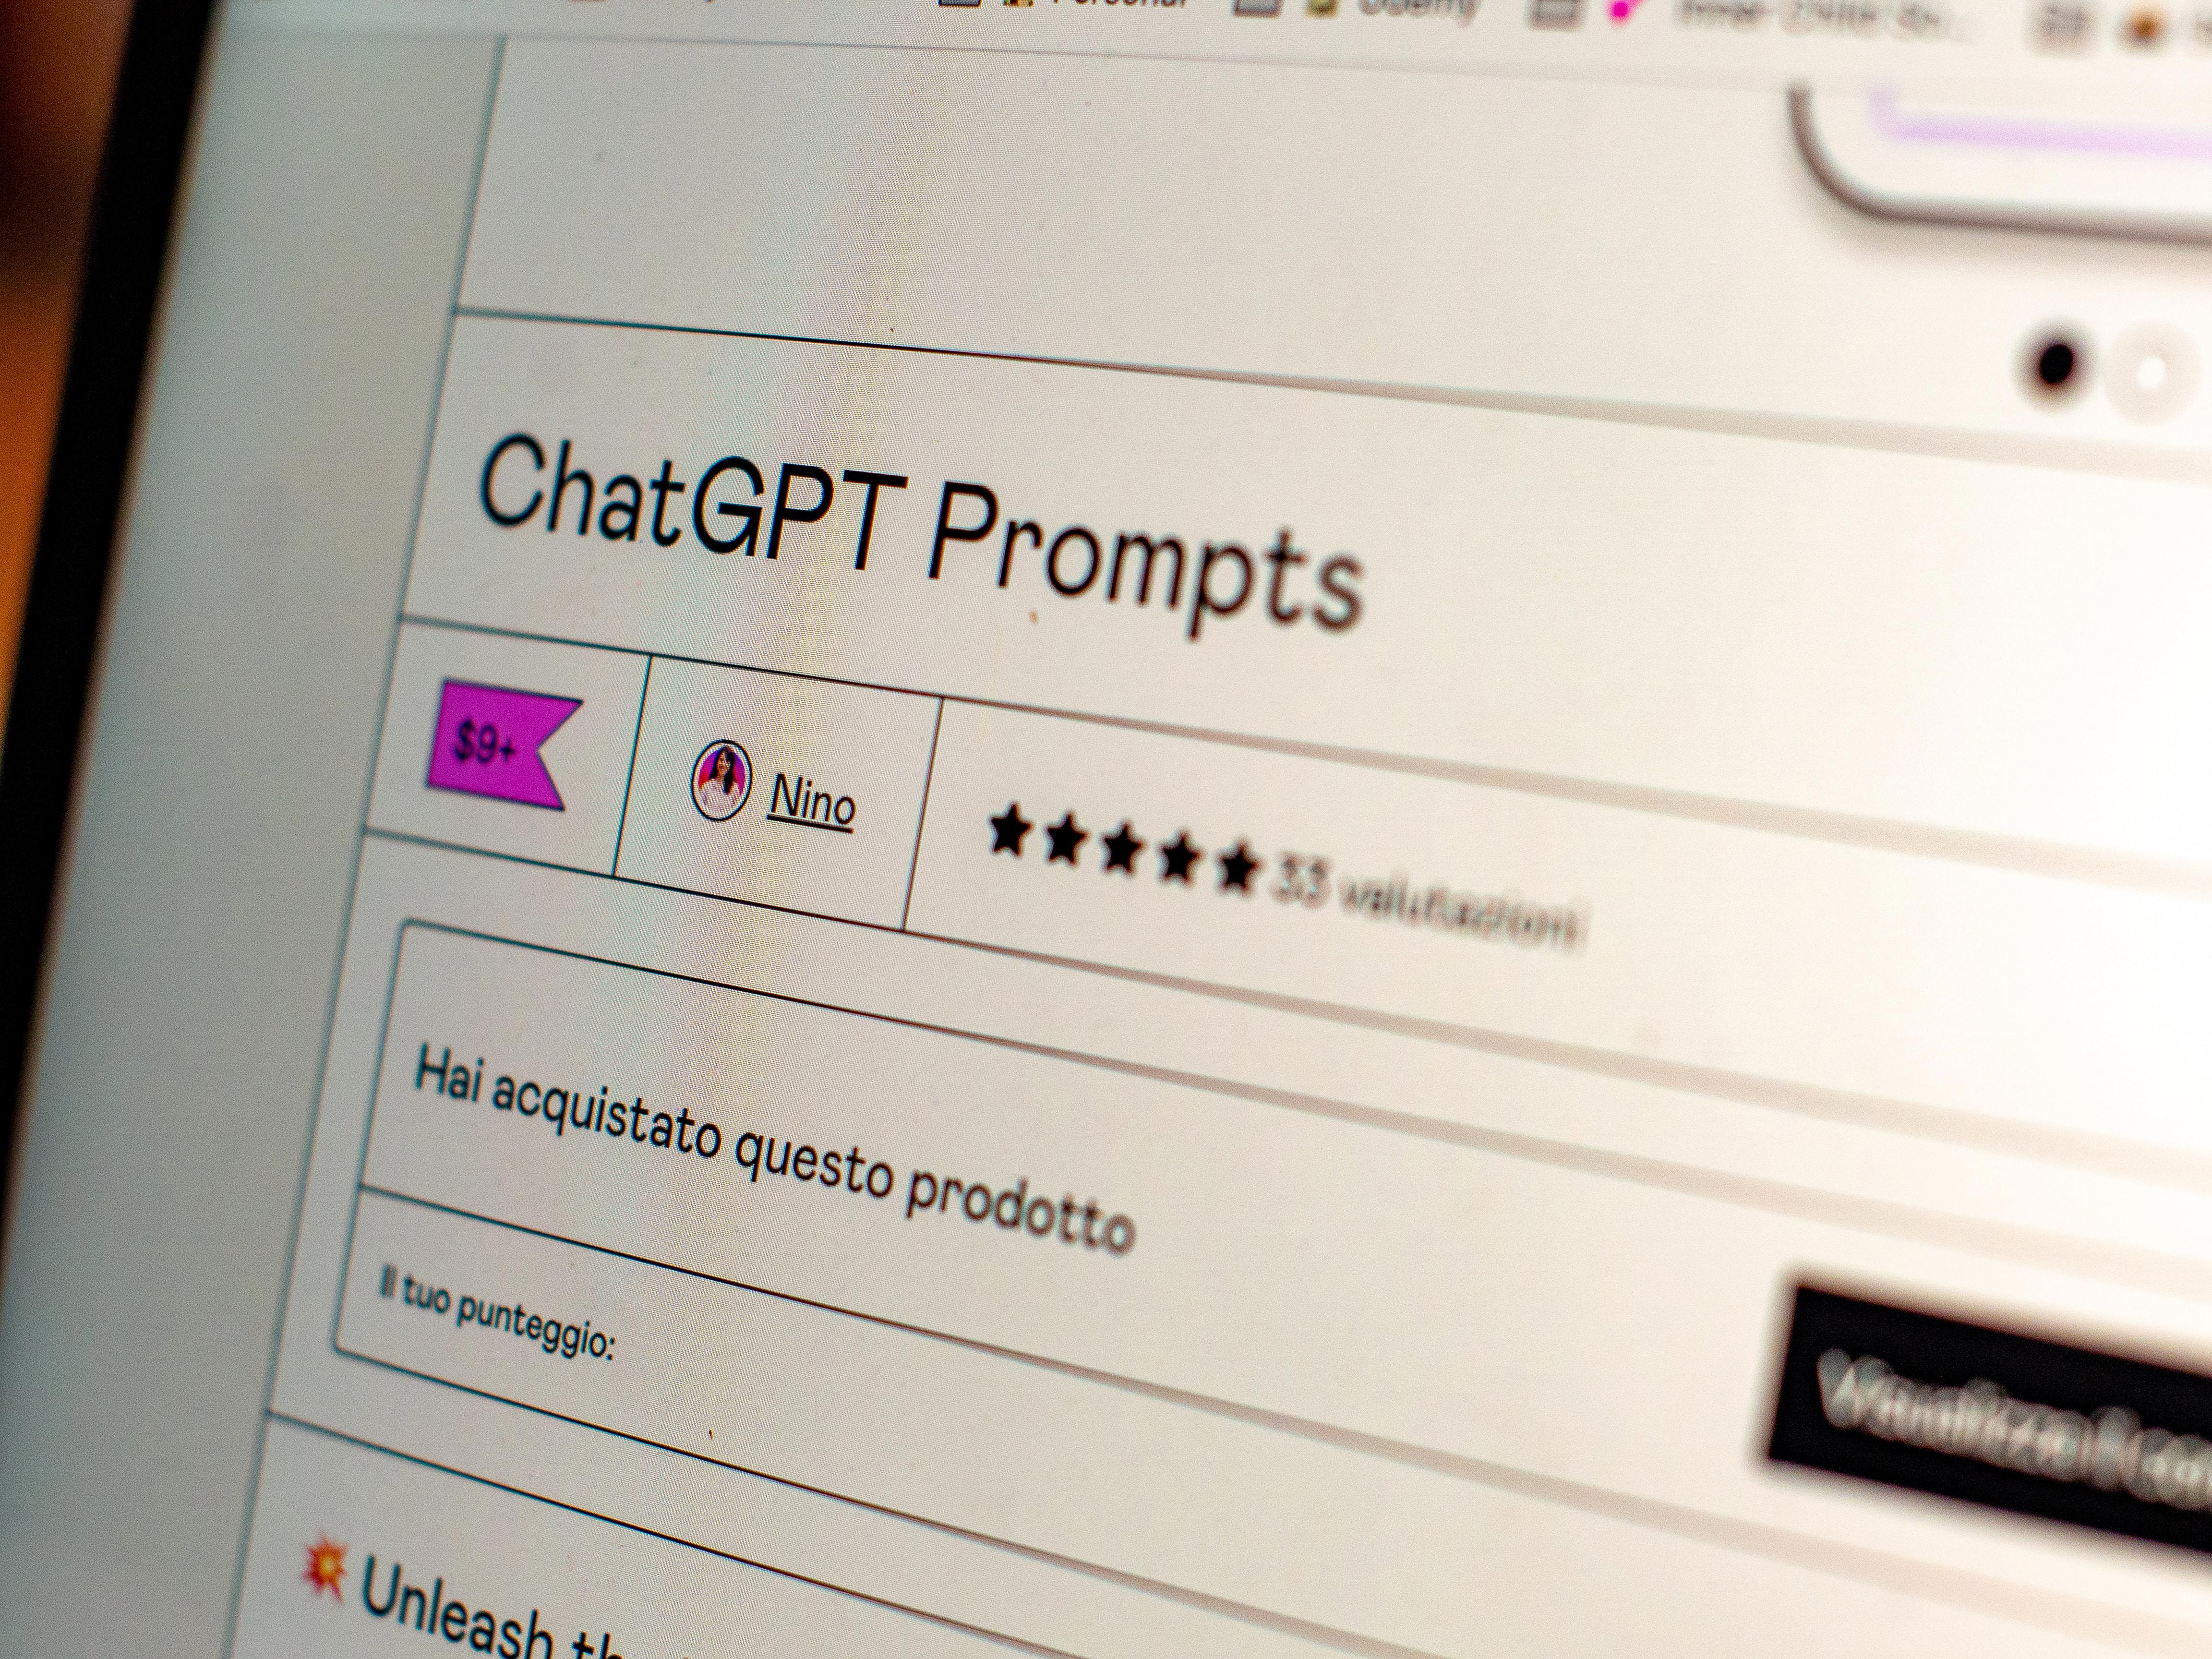 Exploring the Limits of ChatGPT: How it Handles Complex or Nuanced Input